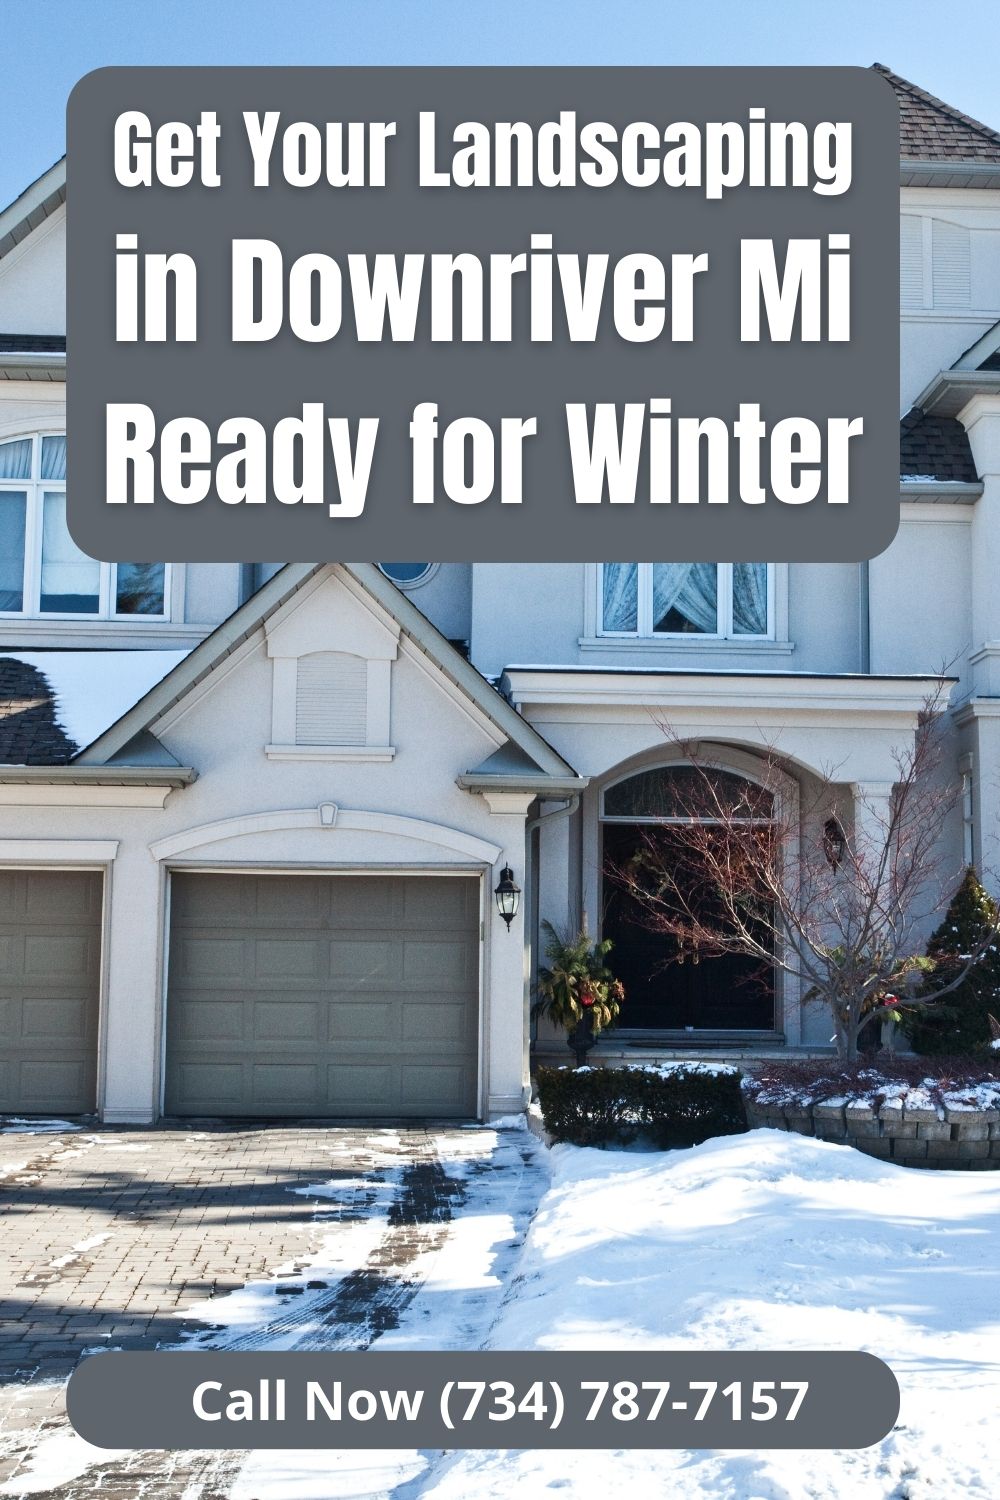 Downriver Michigan Landscaping in Winter